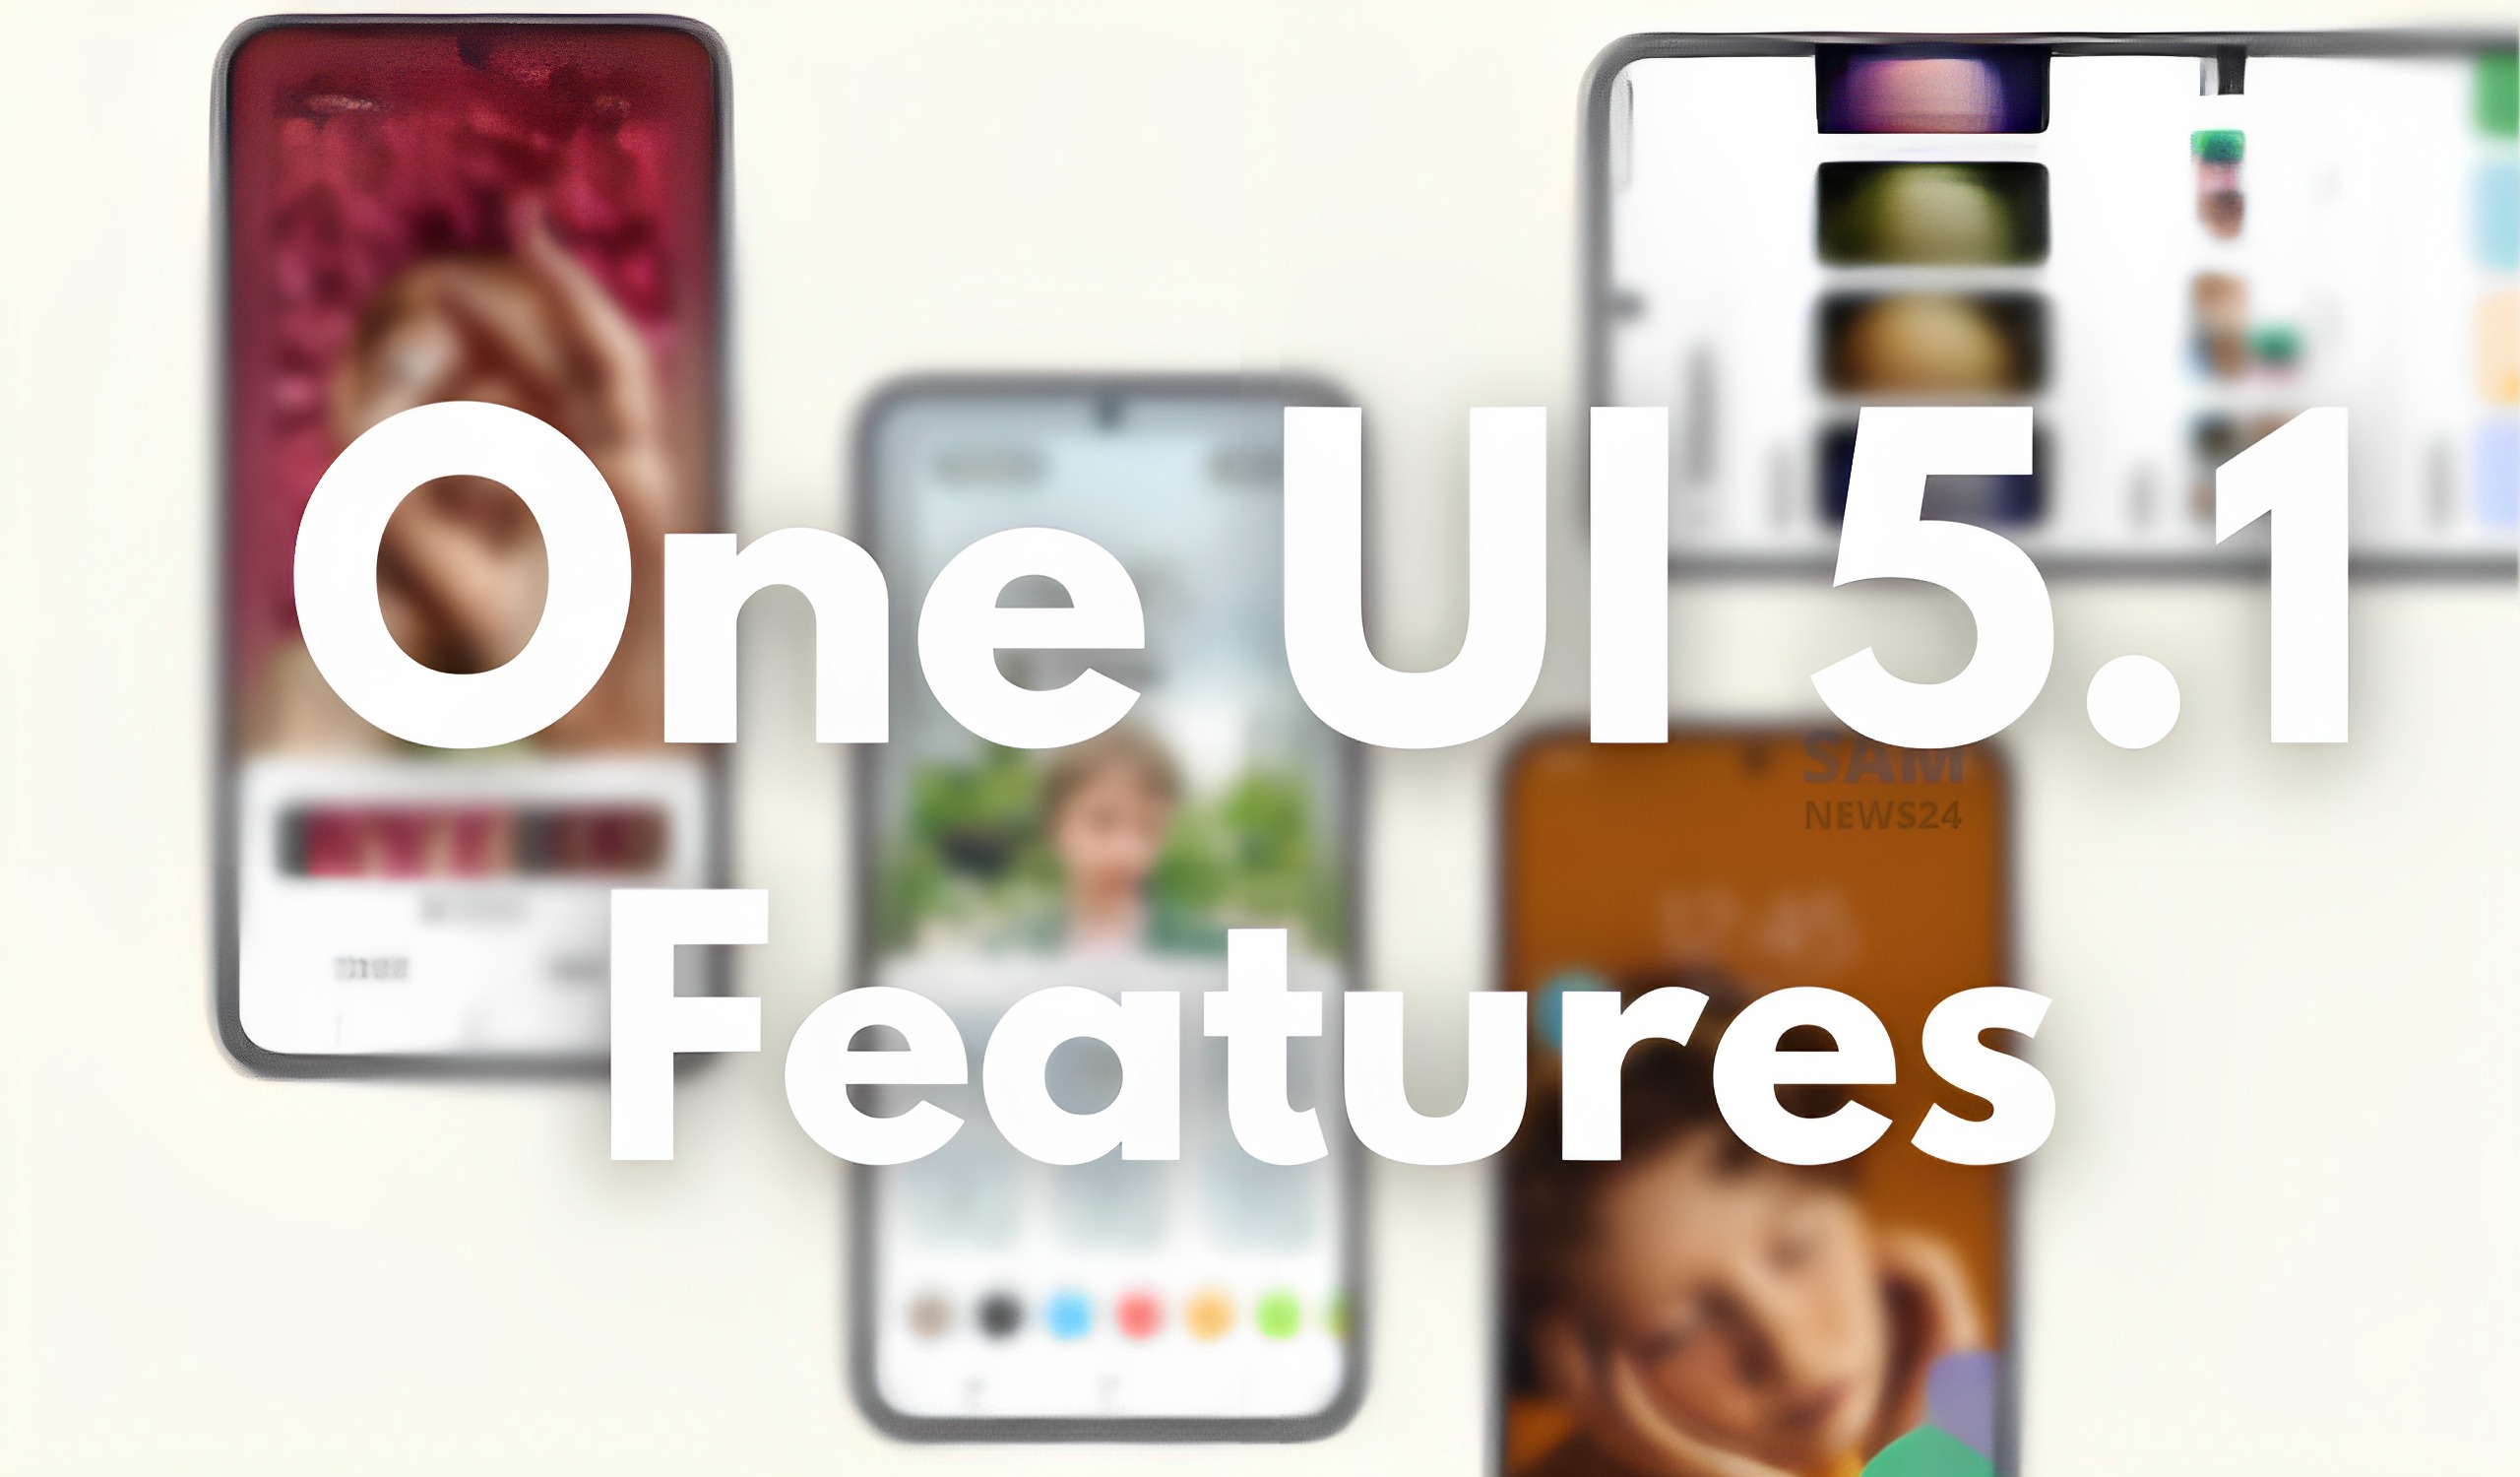 Samsung launched One UI 5.1